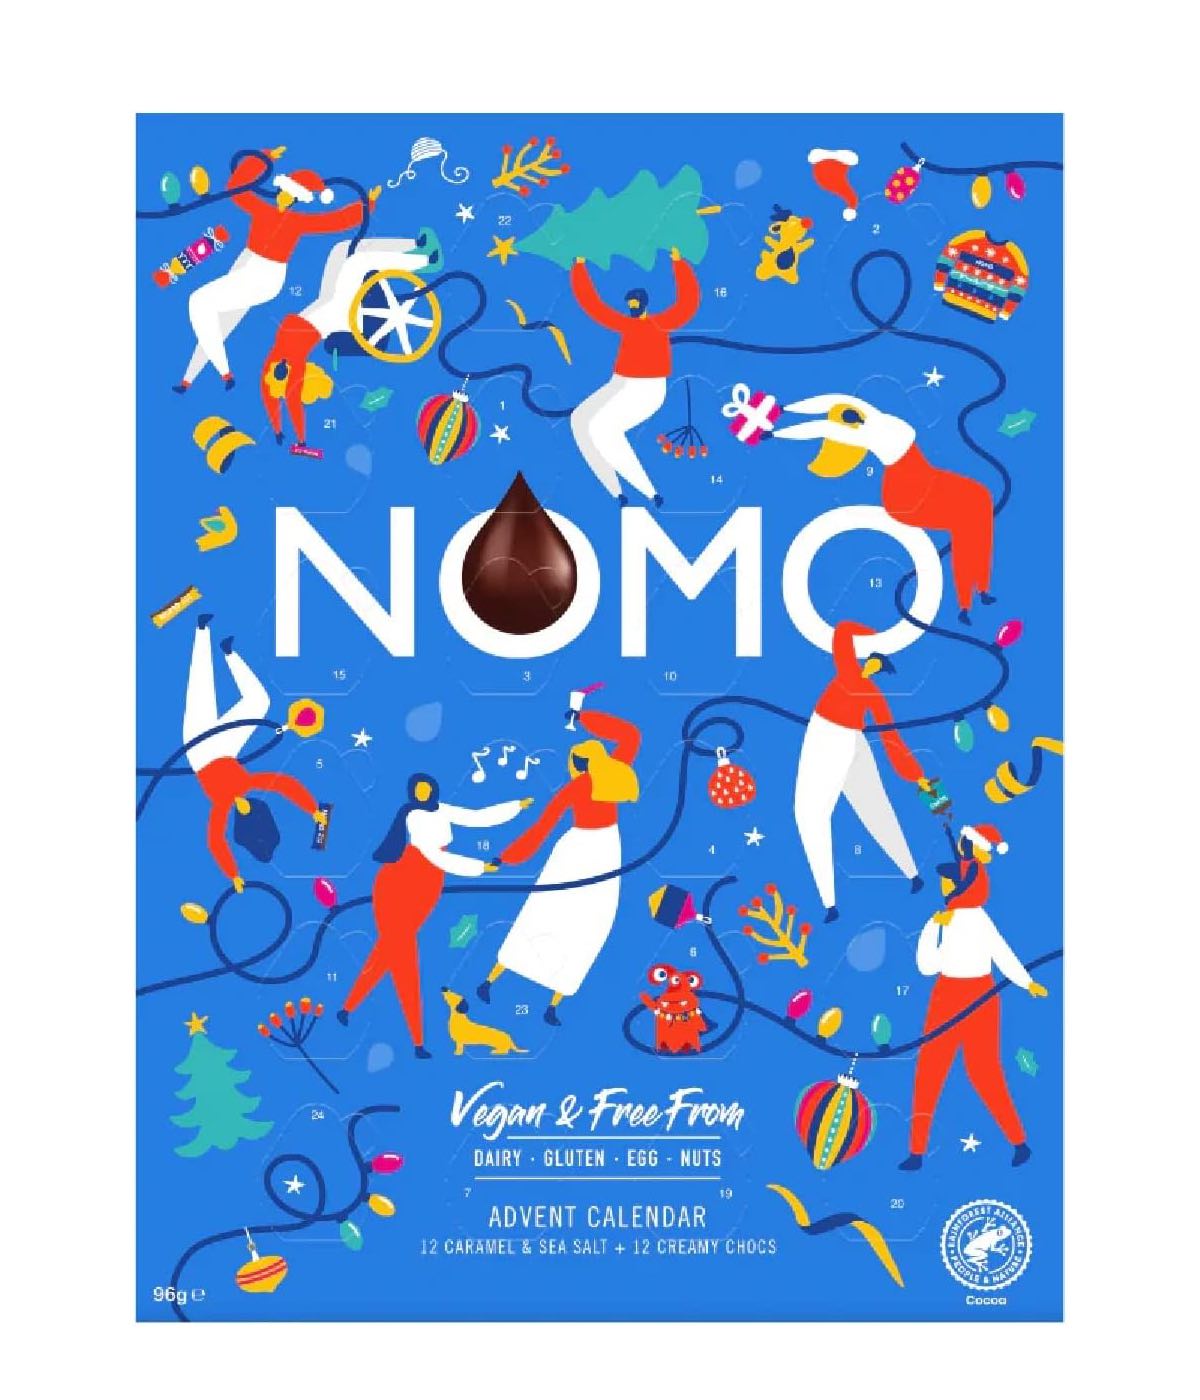 An advent calendar box from the brand Nomo with dairy-free, nut-free, vegan chocolates. 